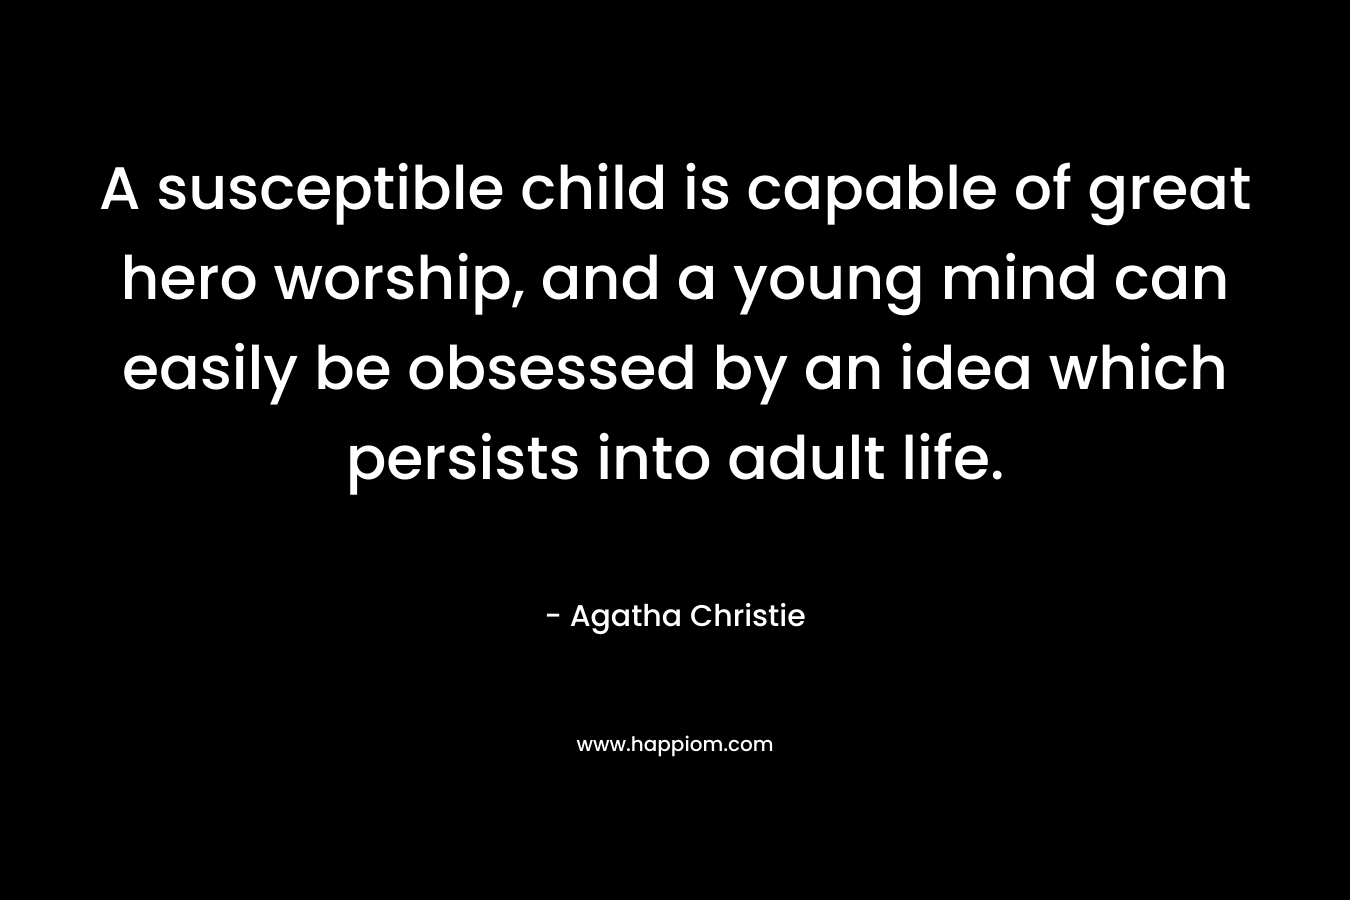 A susceptible child is capable of great hero worship, and a young mind can easily be obsessed by an idea which persists into adult life.